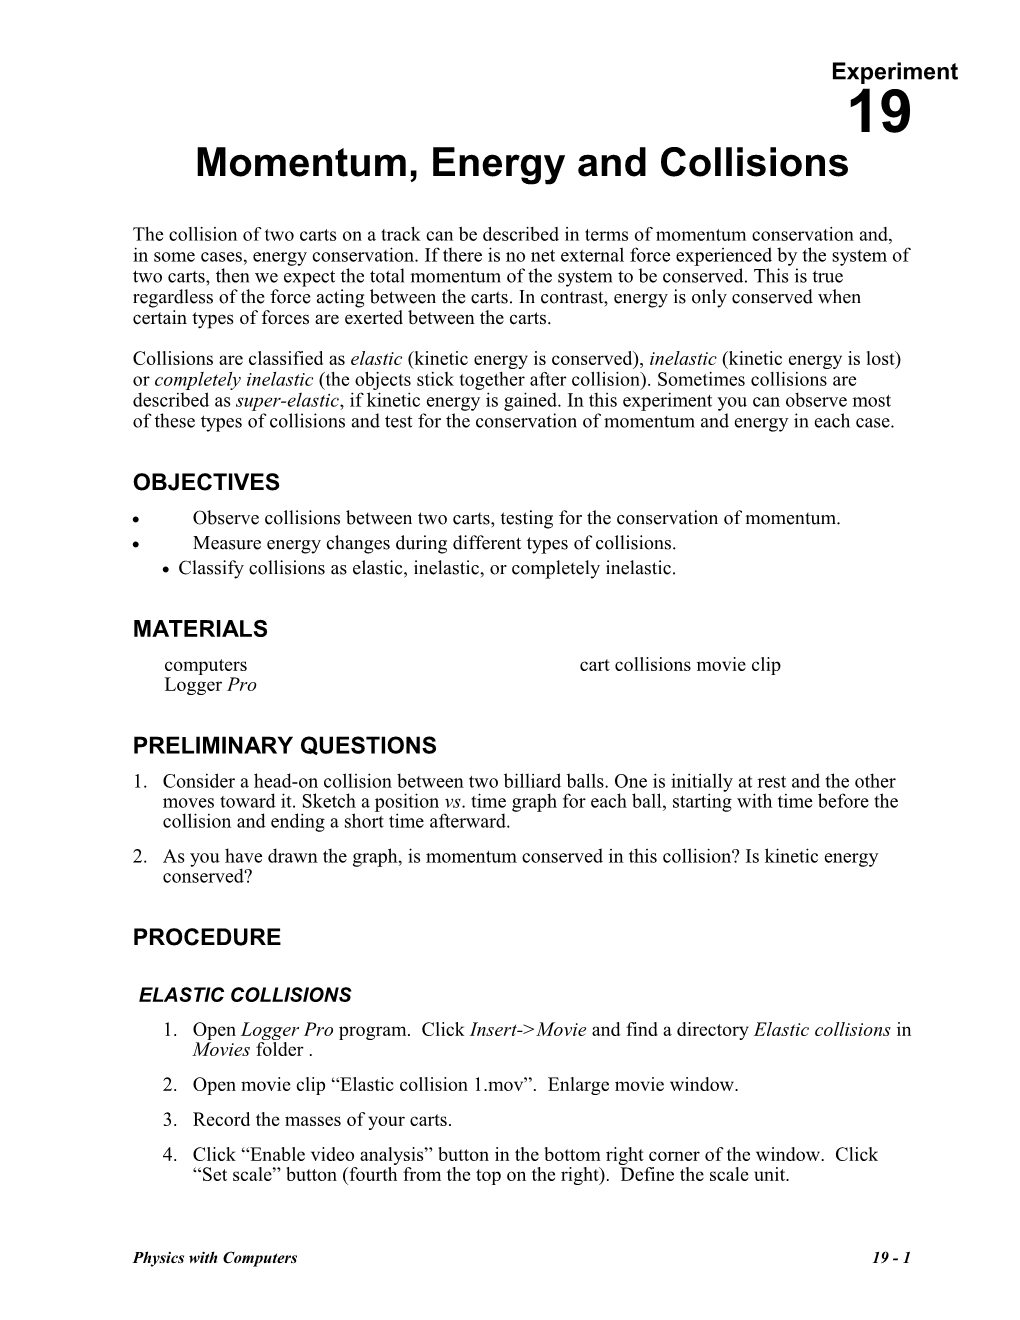 Momentum, Energy and Collisions